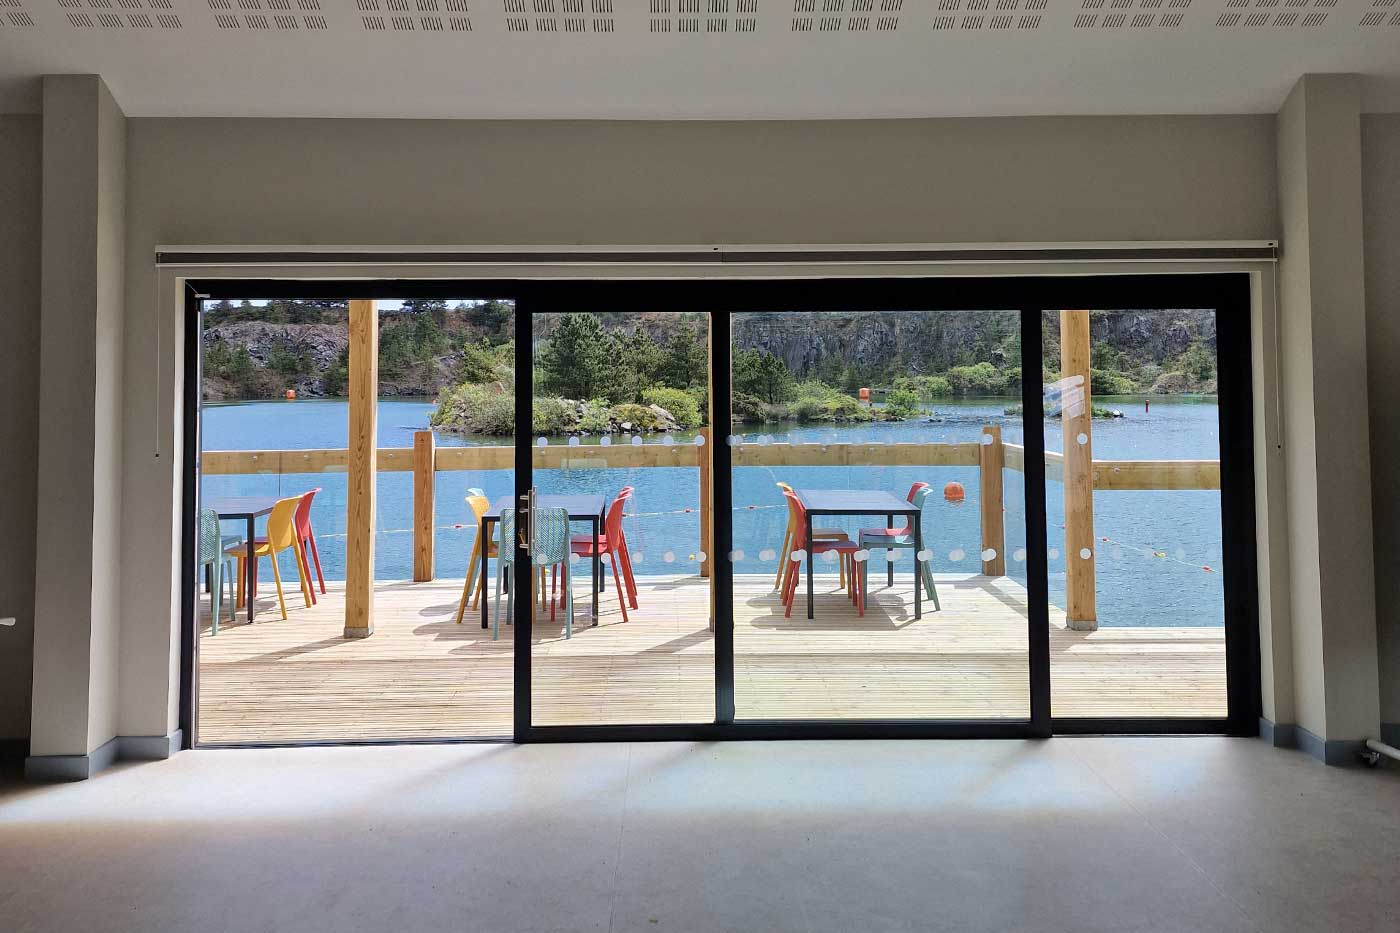 Large patio doors open the function room up to the deck and lake